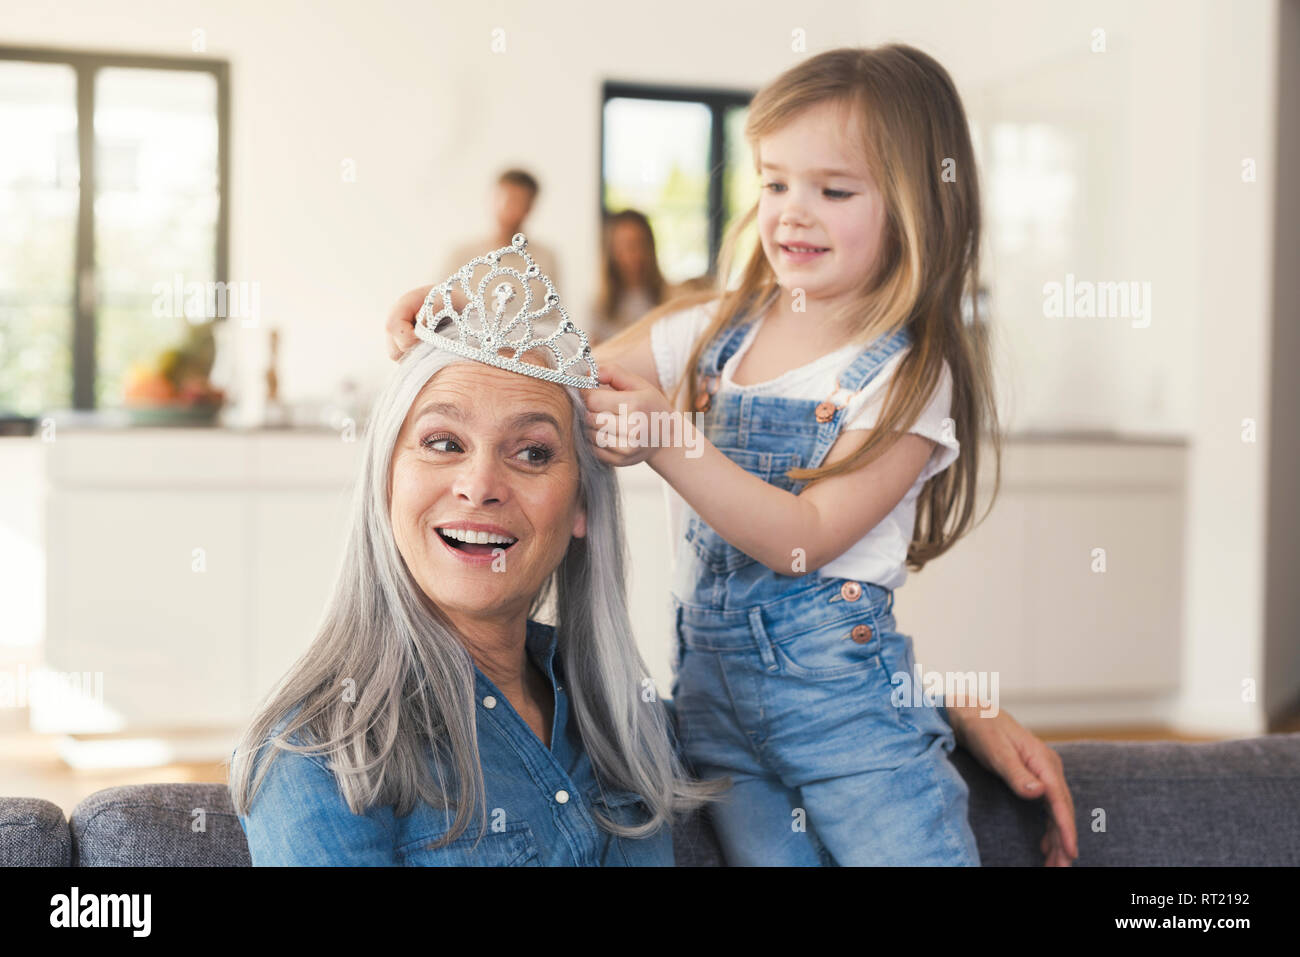 Granddaughter putting crown on grandmothes head Stock Photo